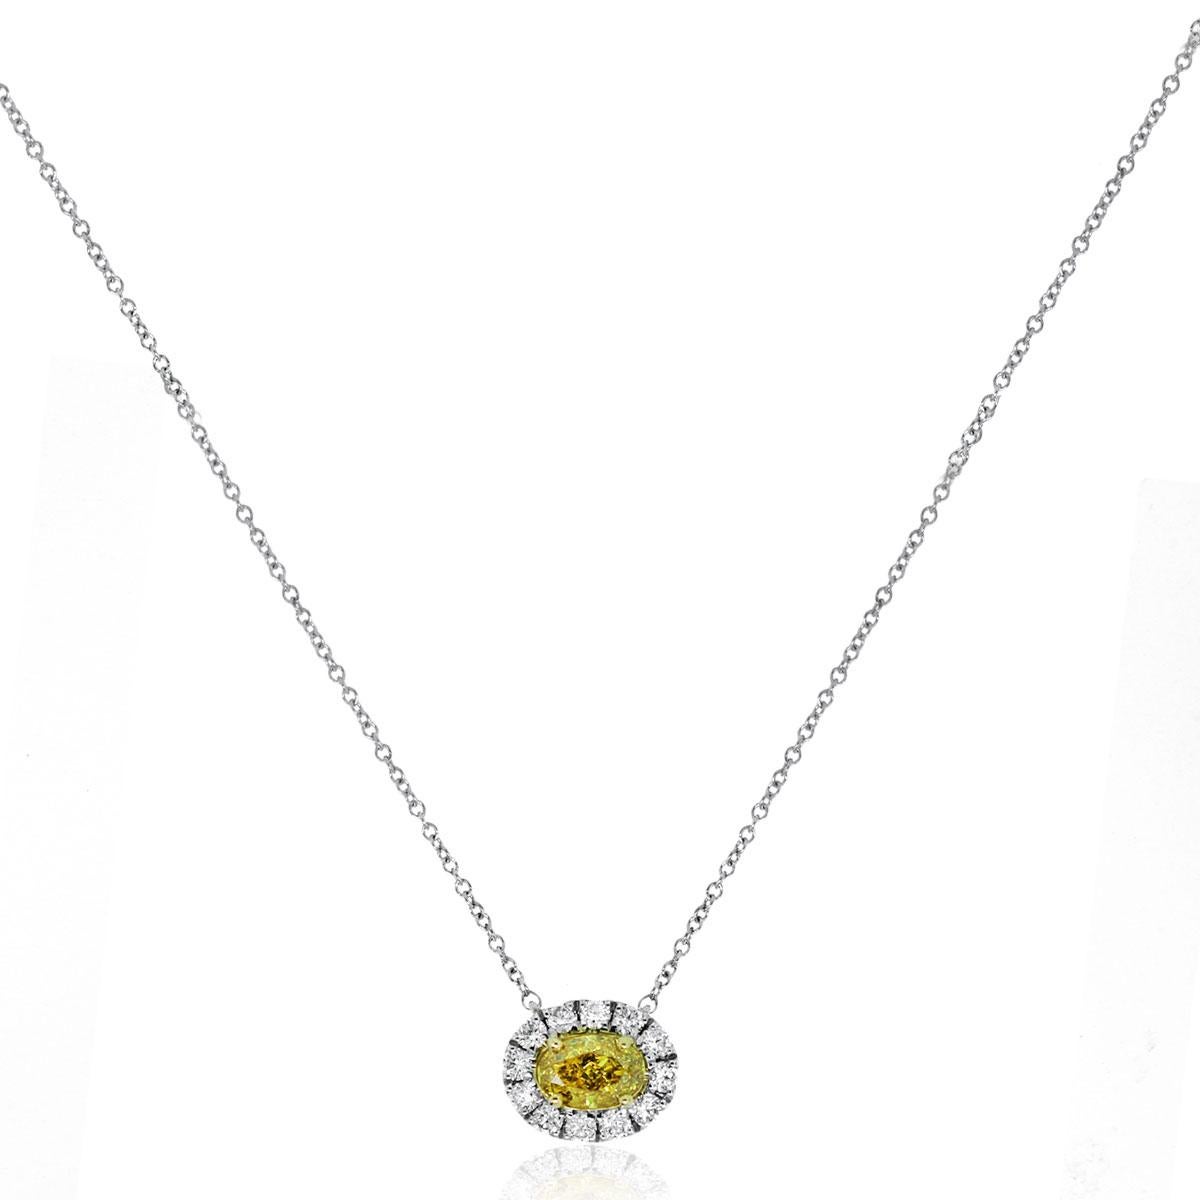 Material: 18k White Gold
Diamond Details: Approximately 0.52ct fancy yellow diamonds and approximately 0.30ctw halo round brilliant diamonds. Diamonds are H in color and SI2 in clarity.
Necklace Measurements: 18″
Pendant Measurements: 0.39″ x 0.22″